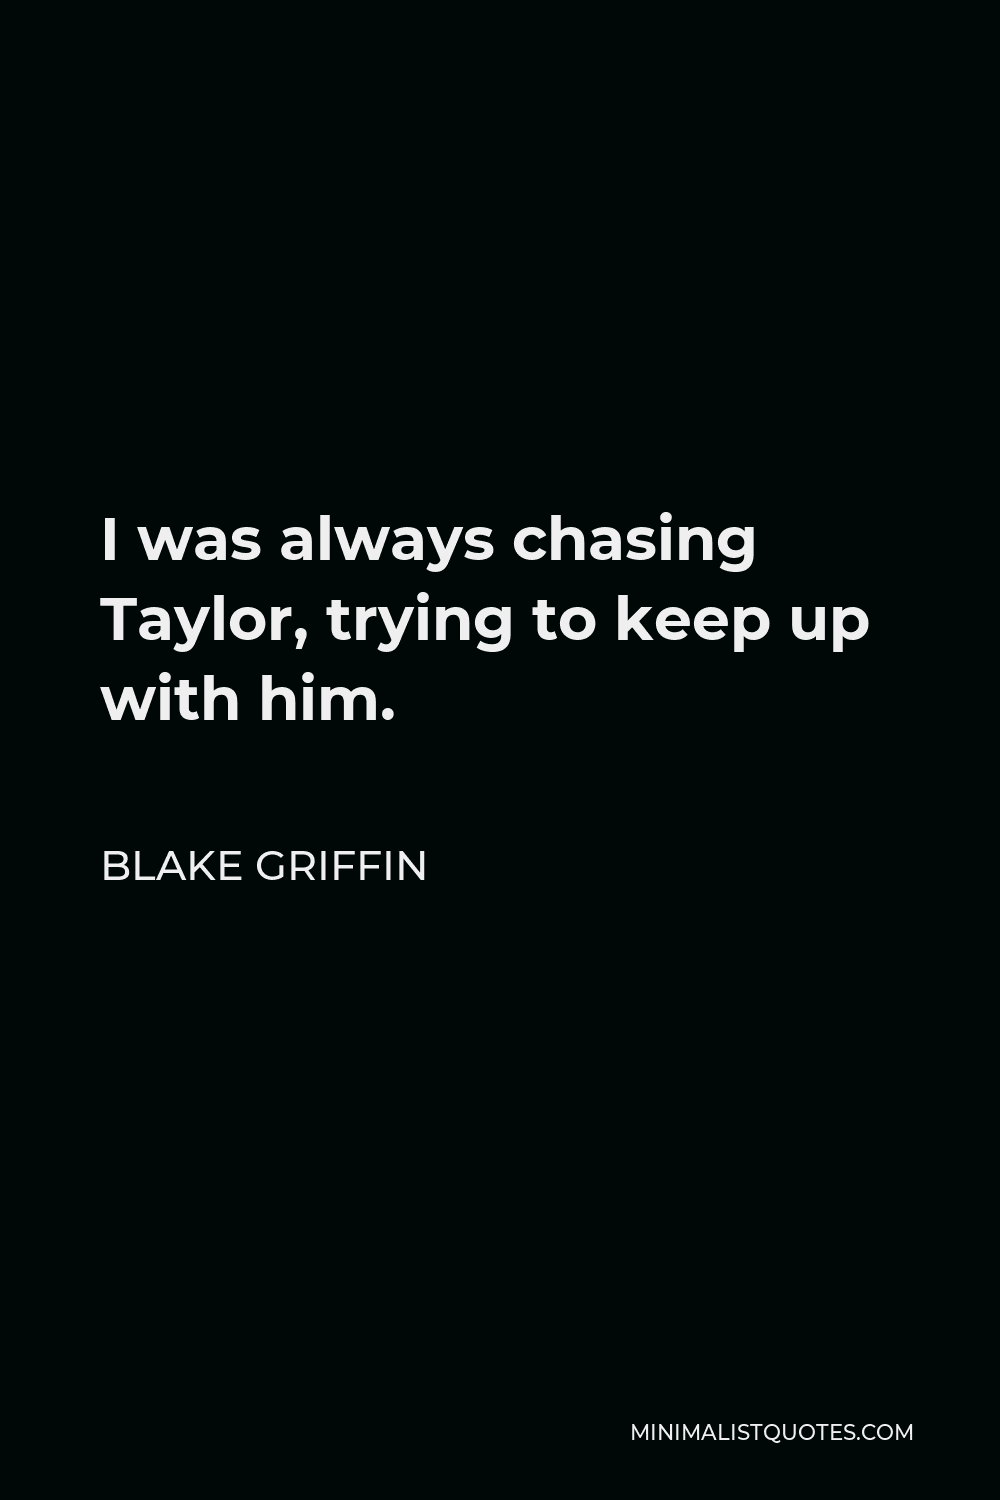 Blake Griffin Quote - I was always chasing Taylor, trying to keep up with him.